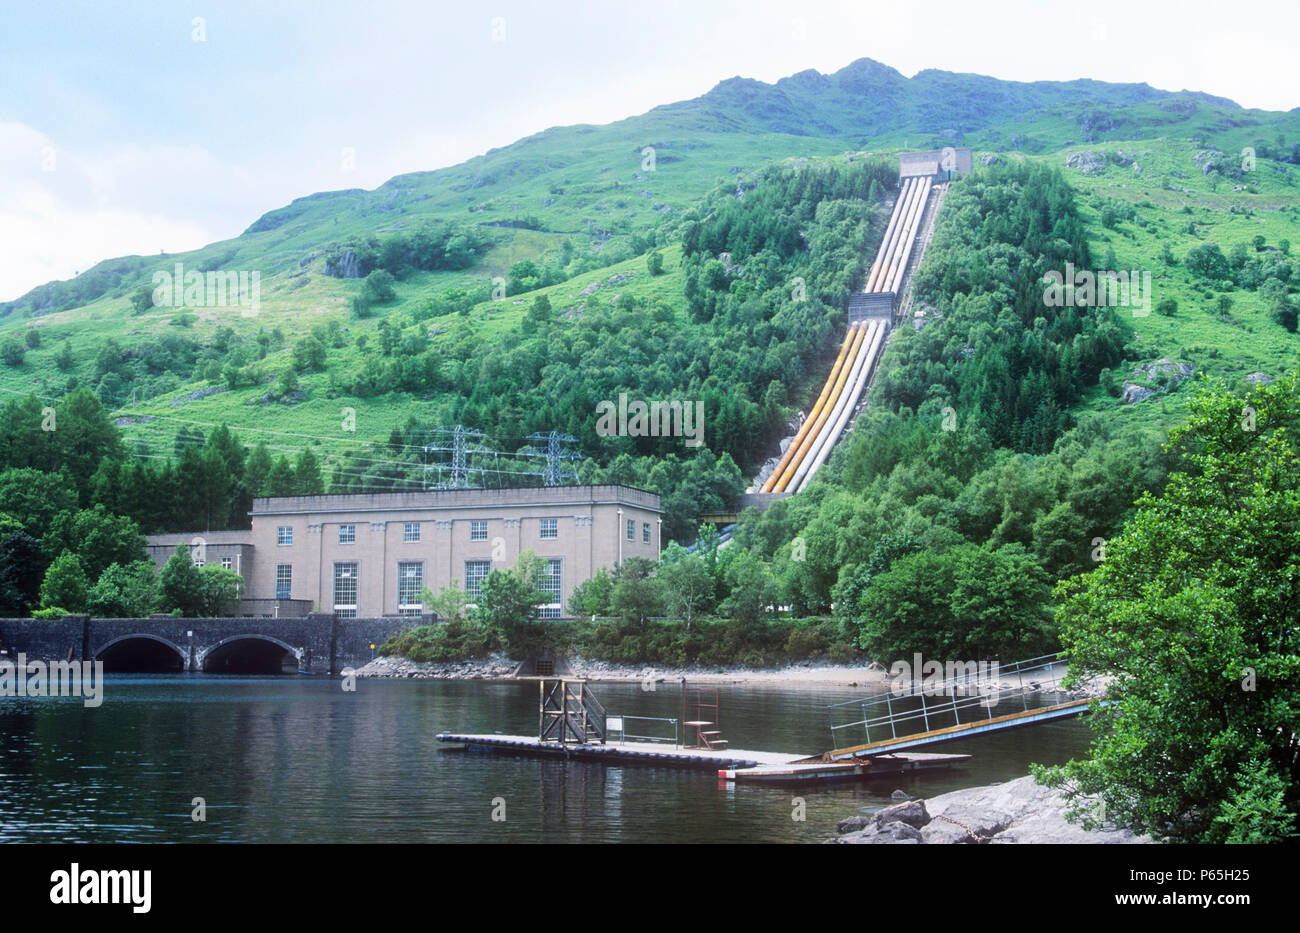 A hydro electric power station on the shores of loch Lomond, Scotland, UK Stock Photo